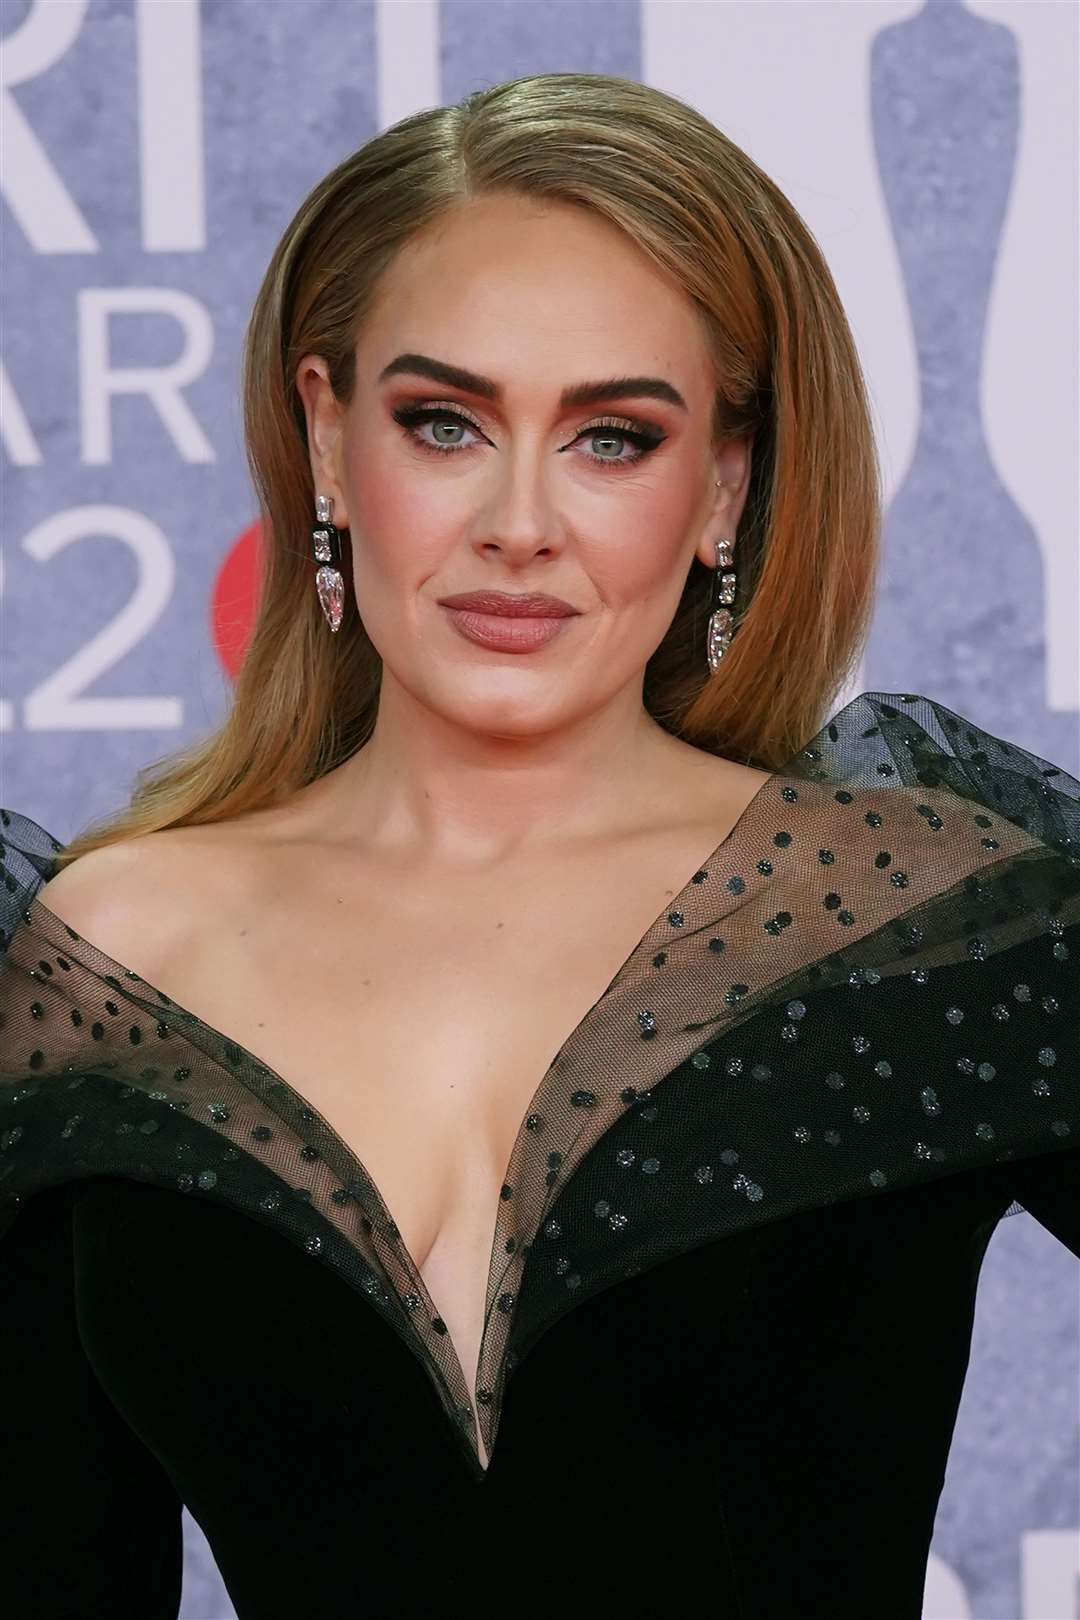 Adele is one of the successful former students of the Brit School in Croydon (PA)